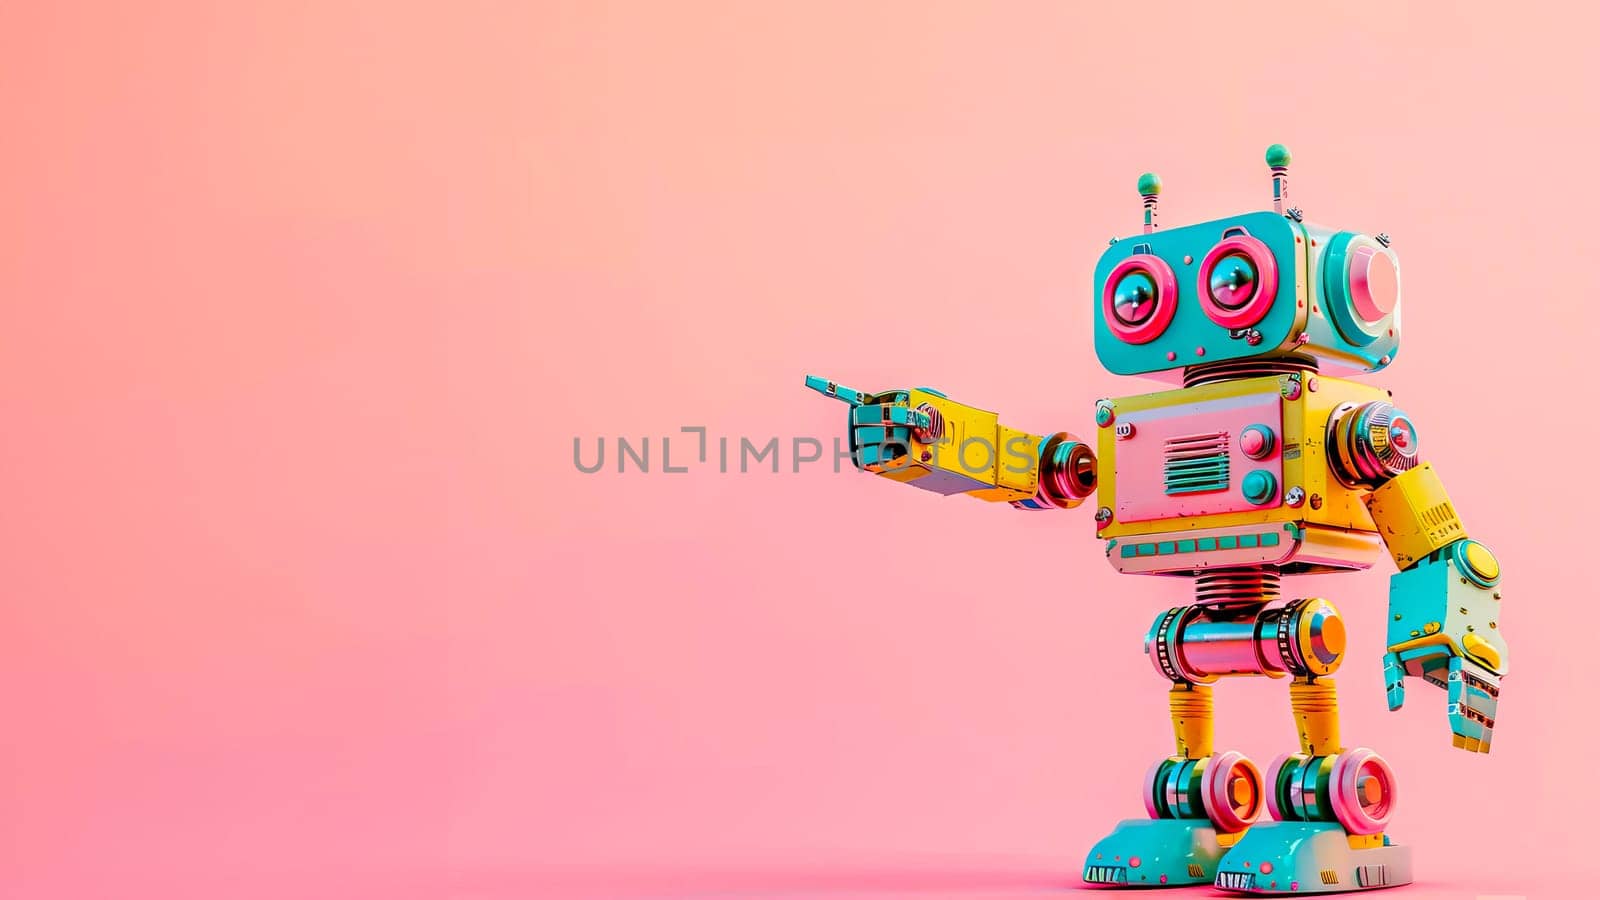 Colorful toy robot with a happy expression pointing at something on a bright pink backdrop. by vladimka